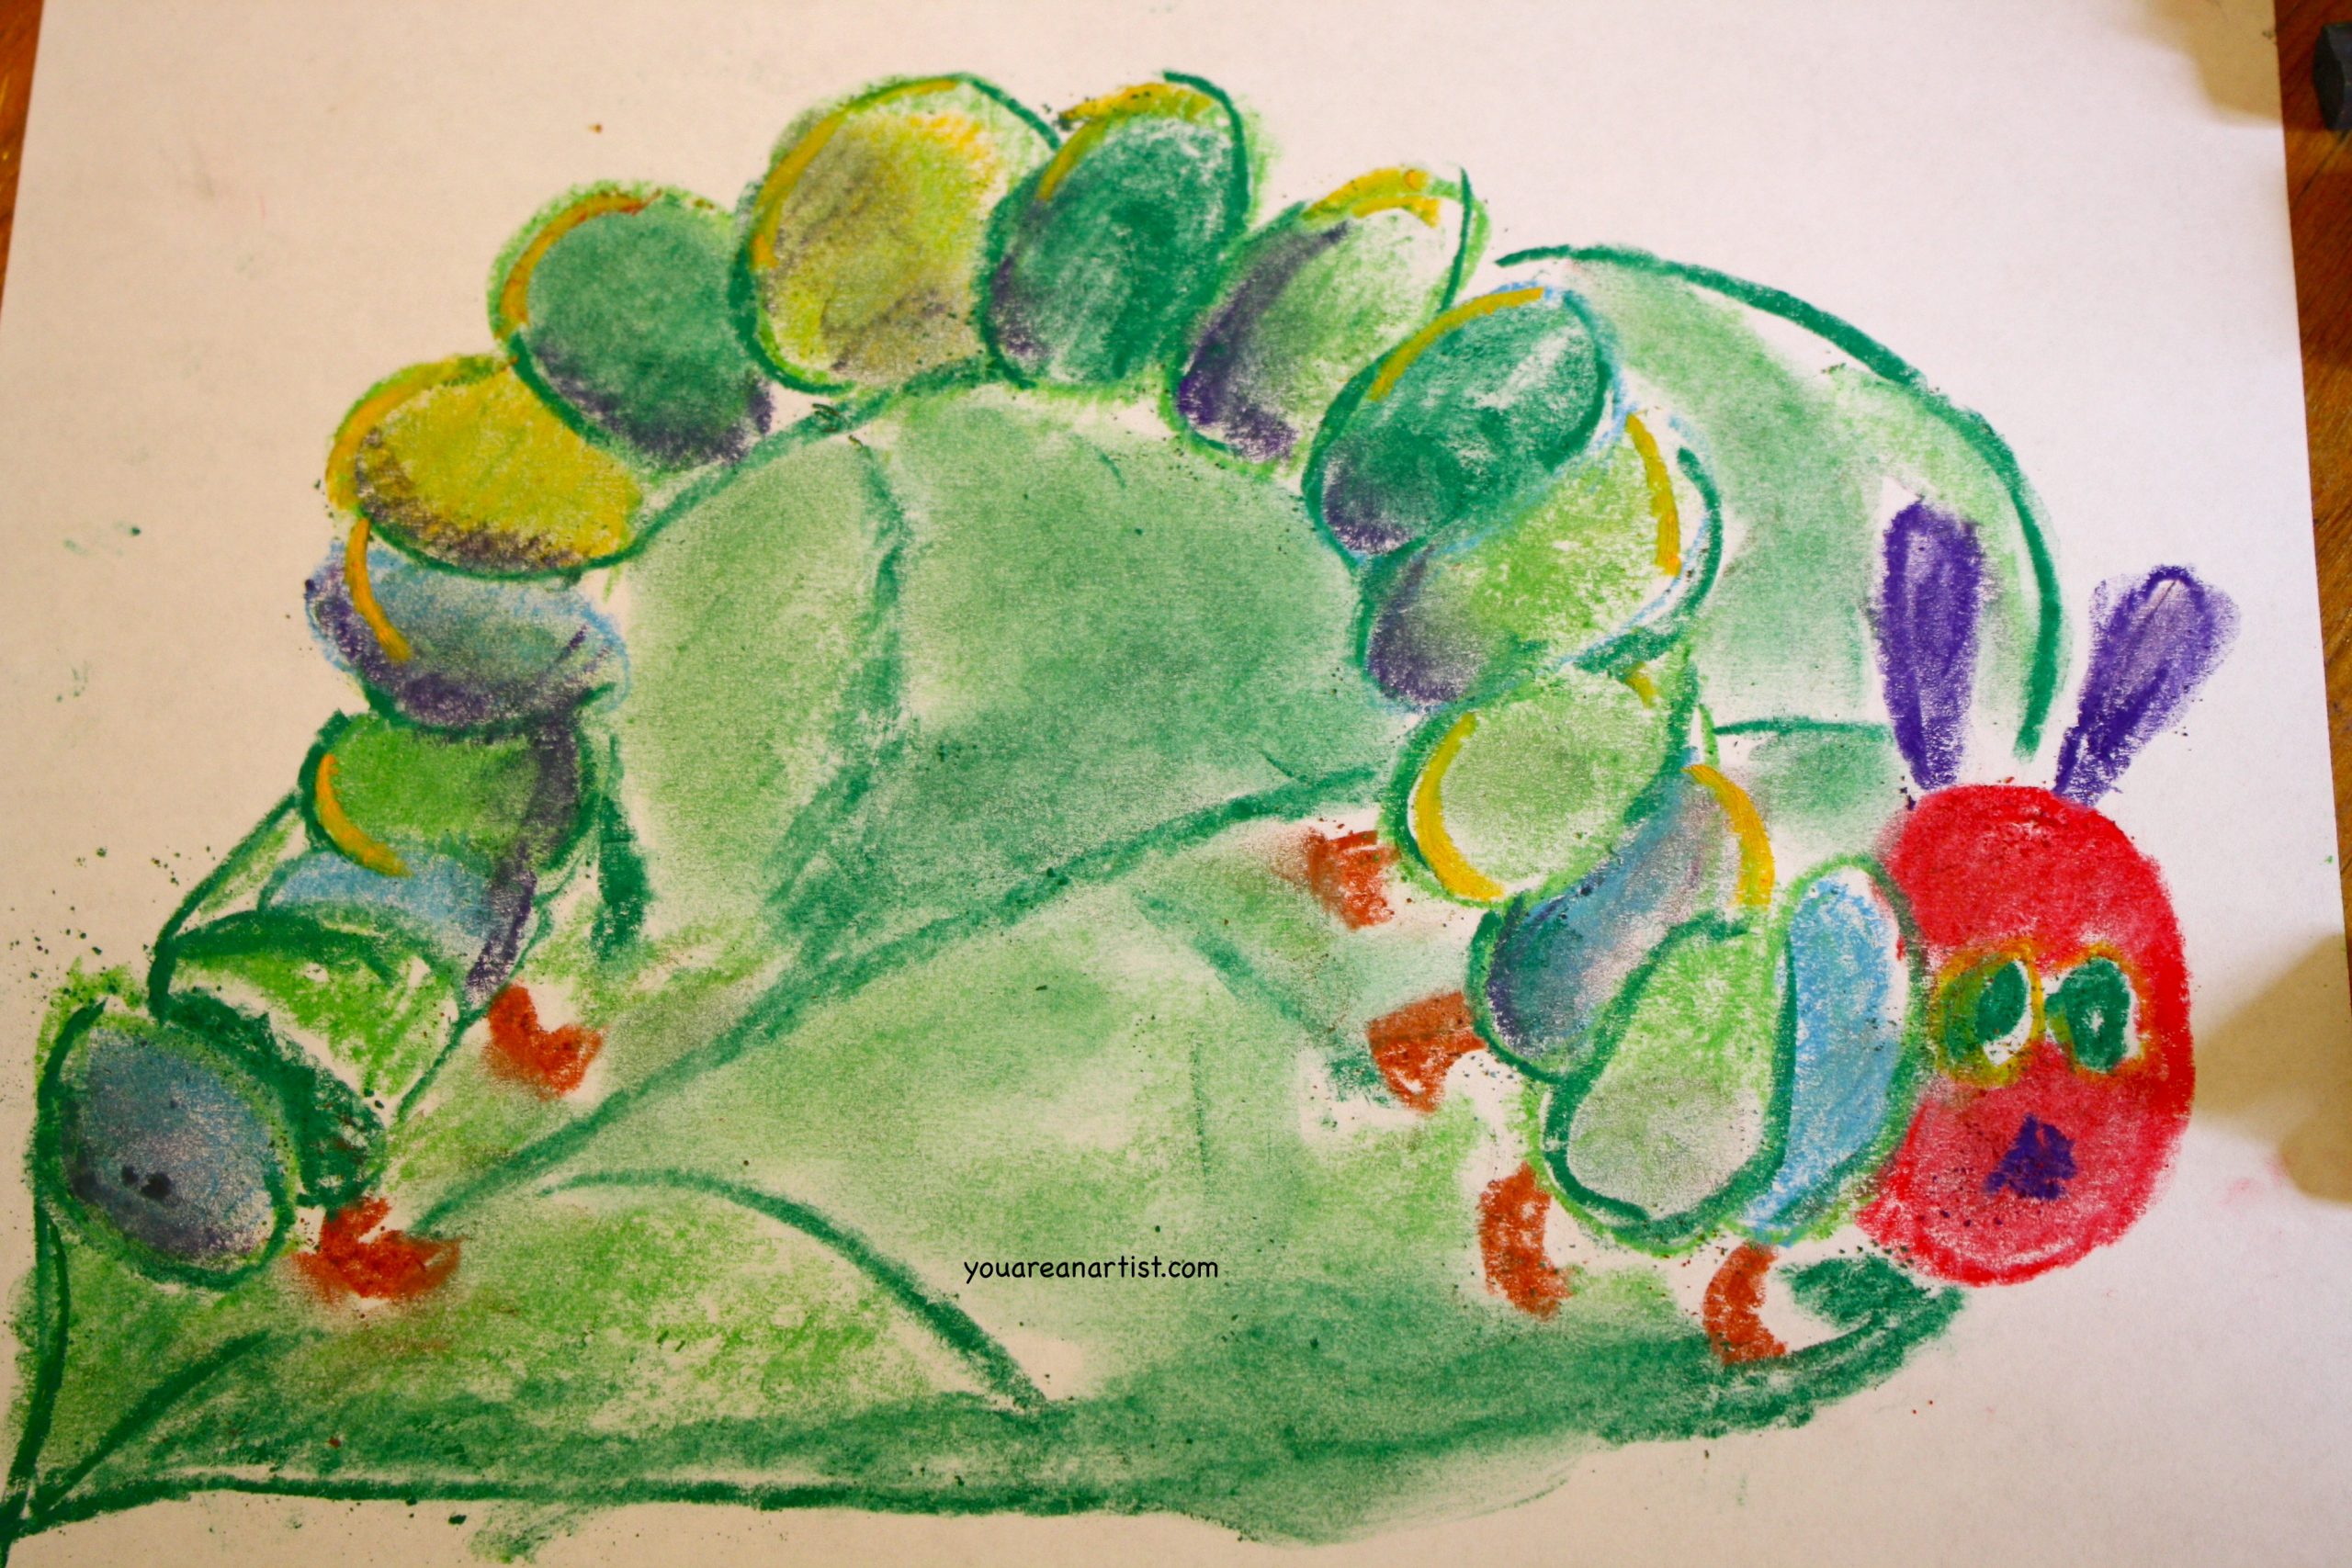 In this art lesson, Nana's granddaughter teaches her how to draw a caterpillar with chalk pastels in the style of Eric Carle's Very Hungry Caterpillar.